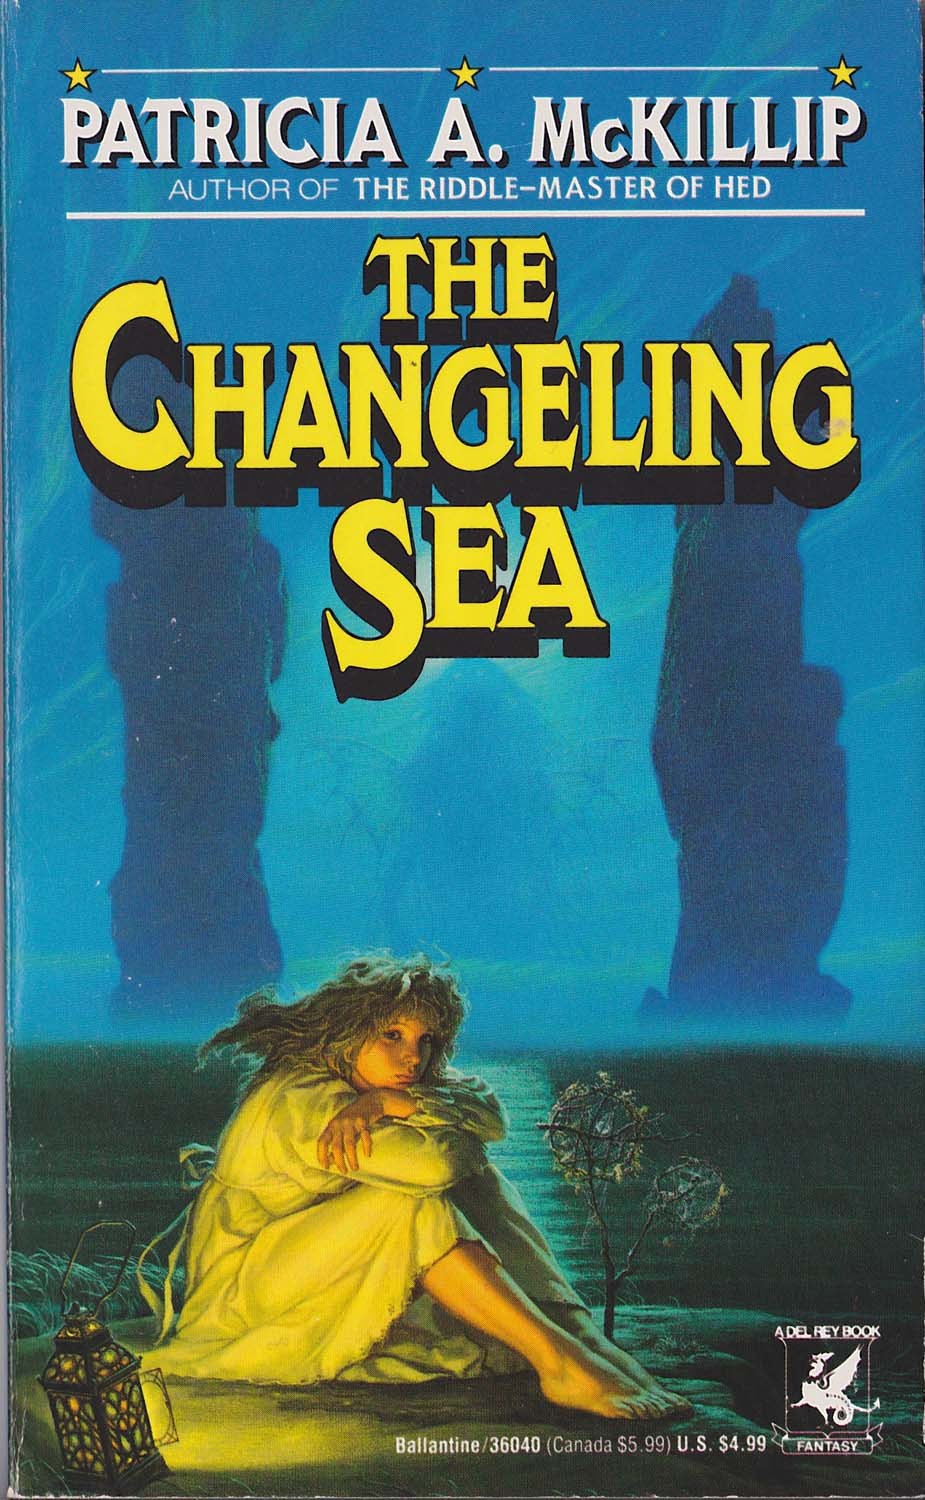 The Changeling Sea